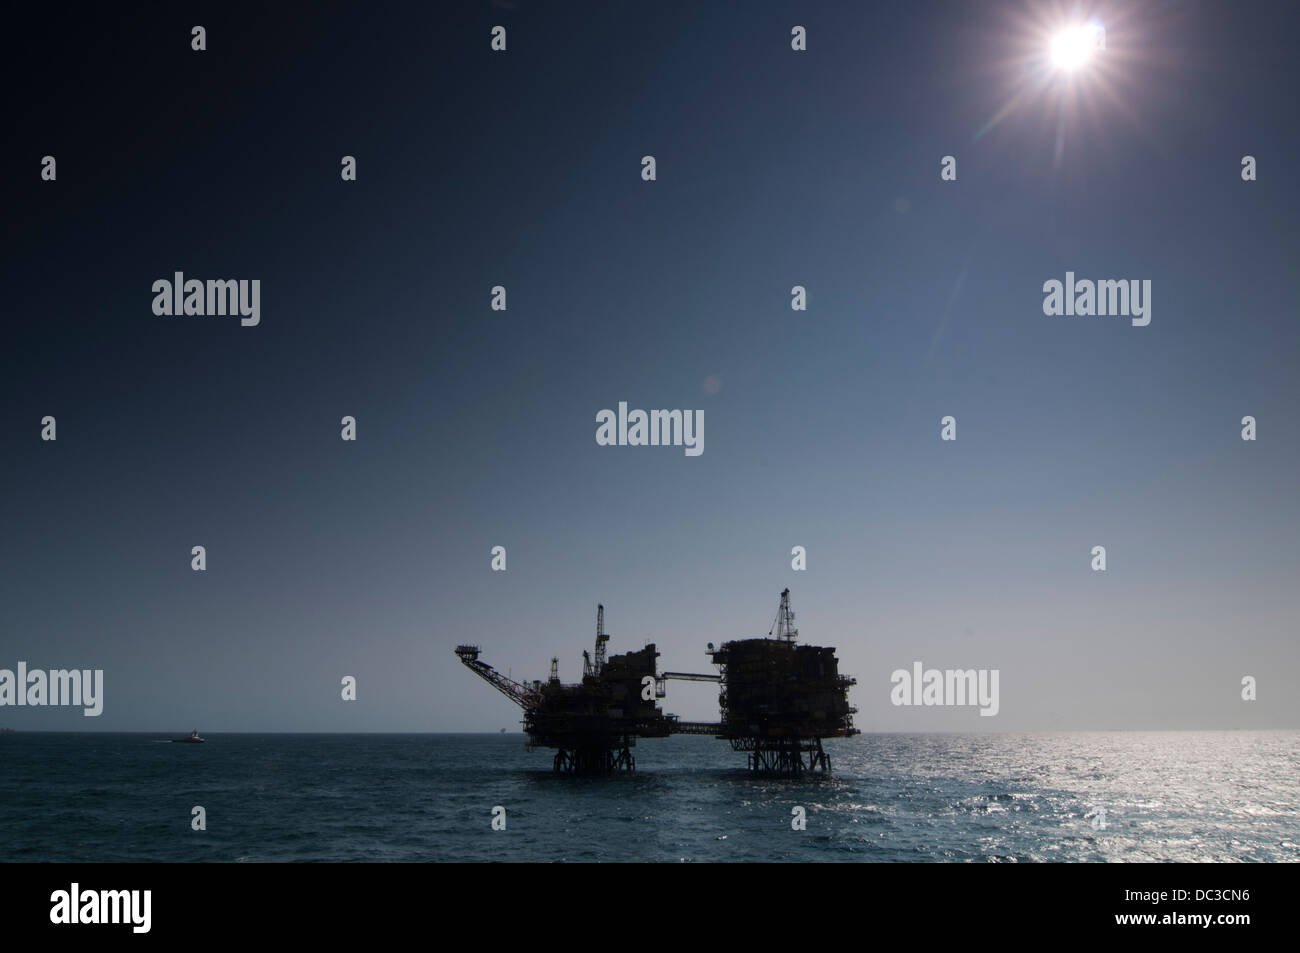 silhouette of an oil rig in offshore area, Hard back light, blue sky, refelection on water surface. Stock Photo